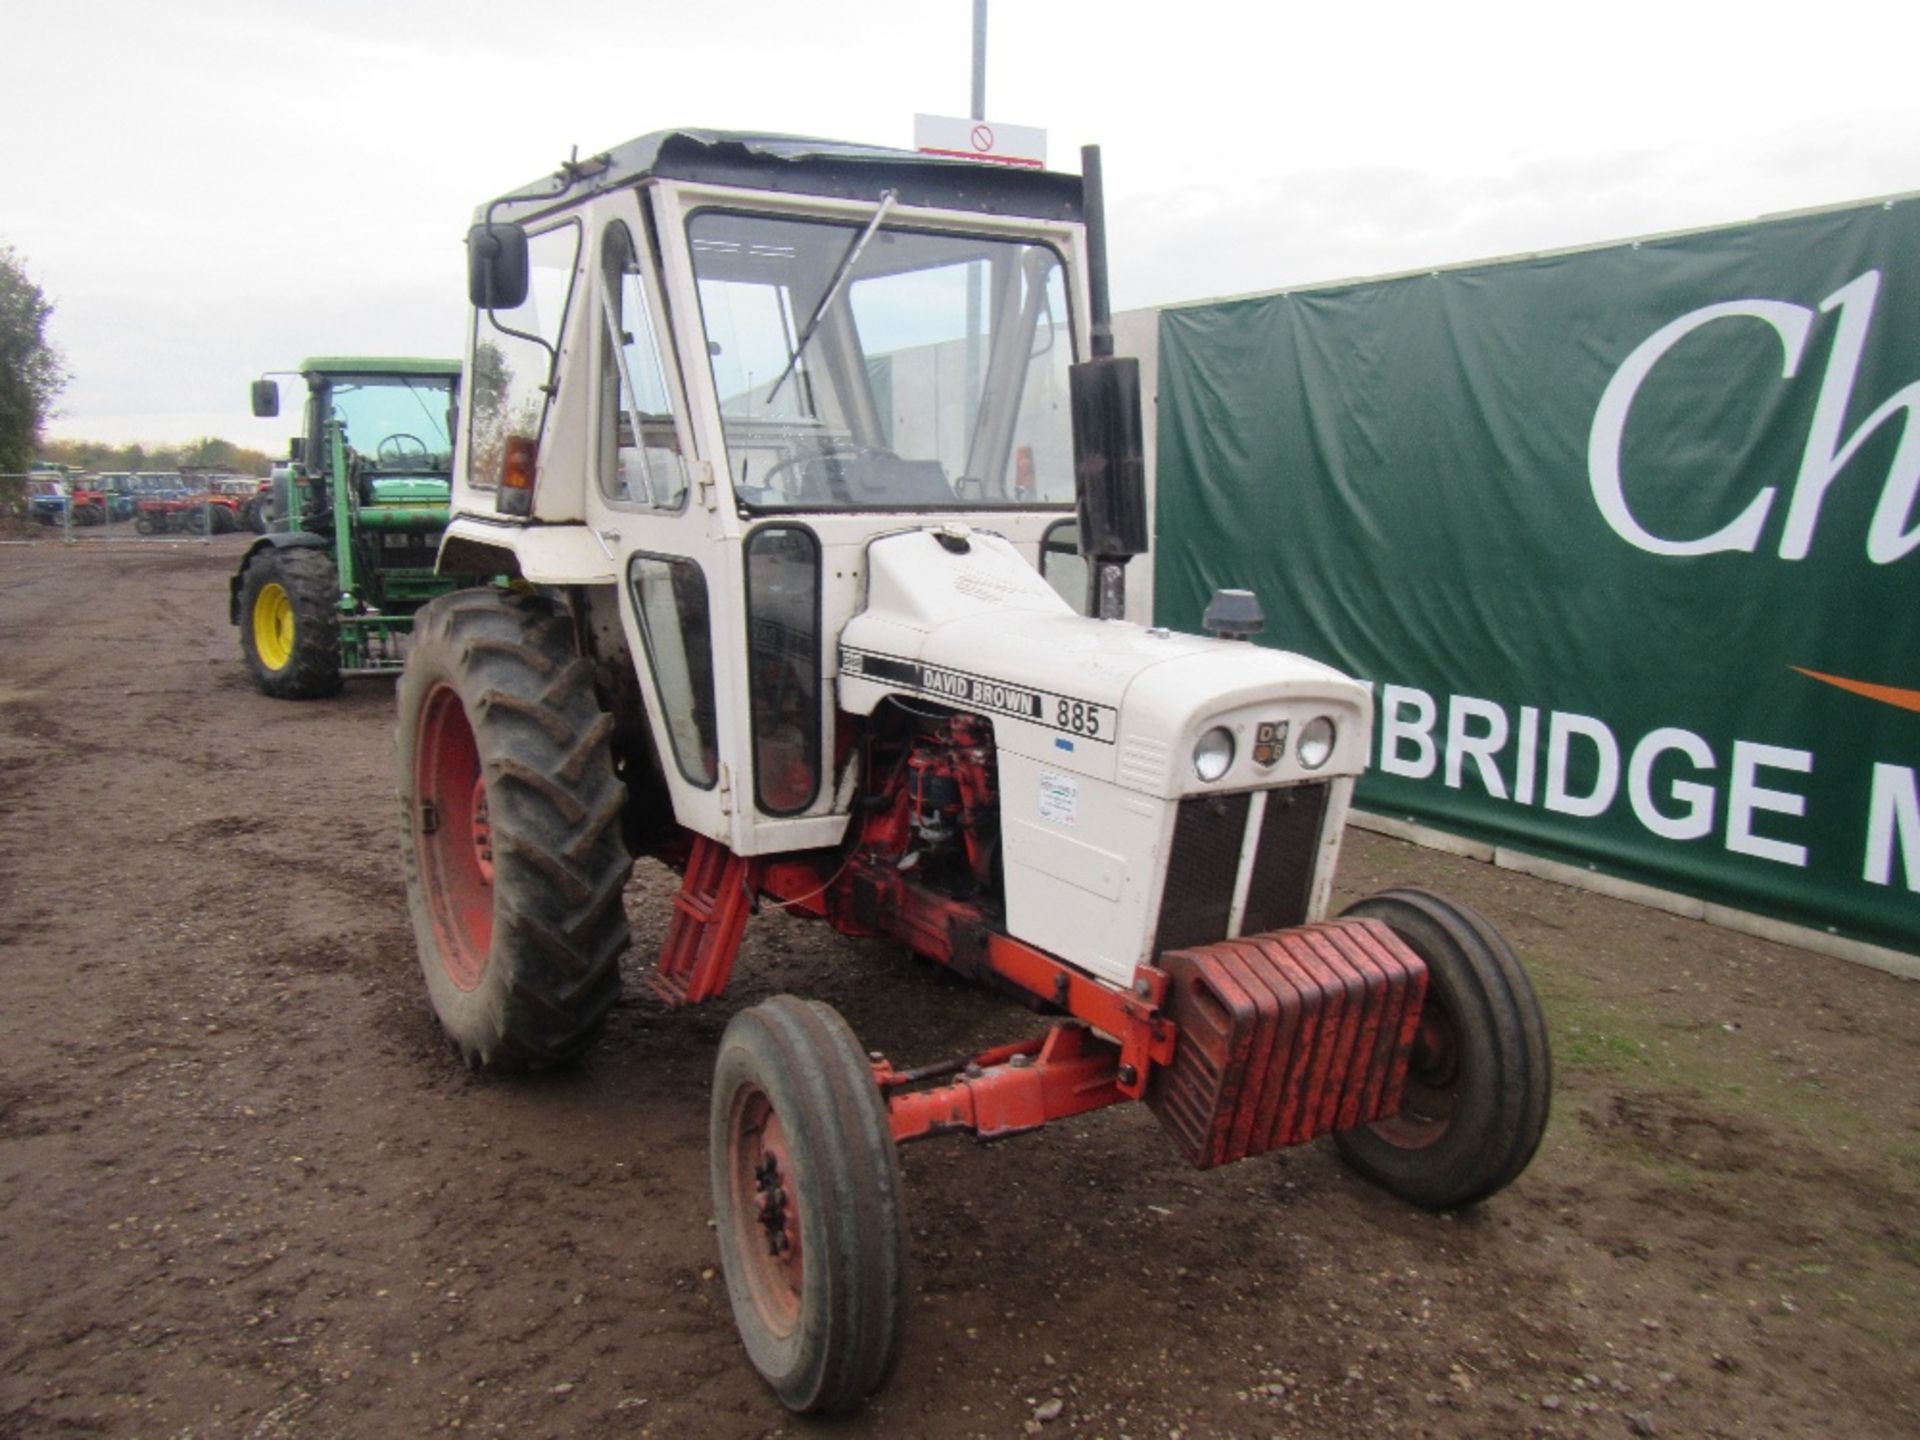 David Brown 885 2wd Tractor. - Image 3 of 17